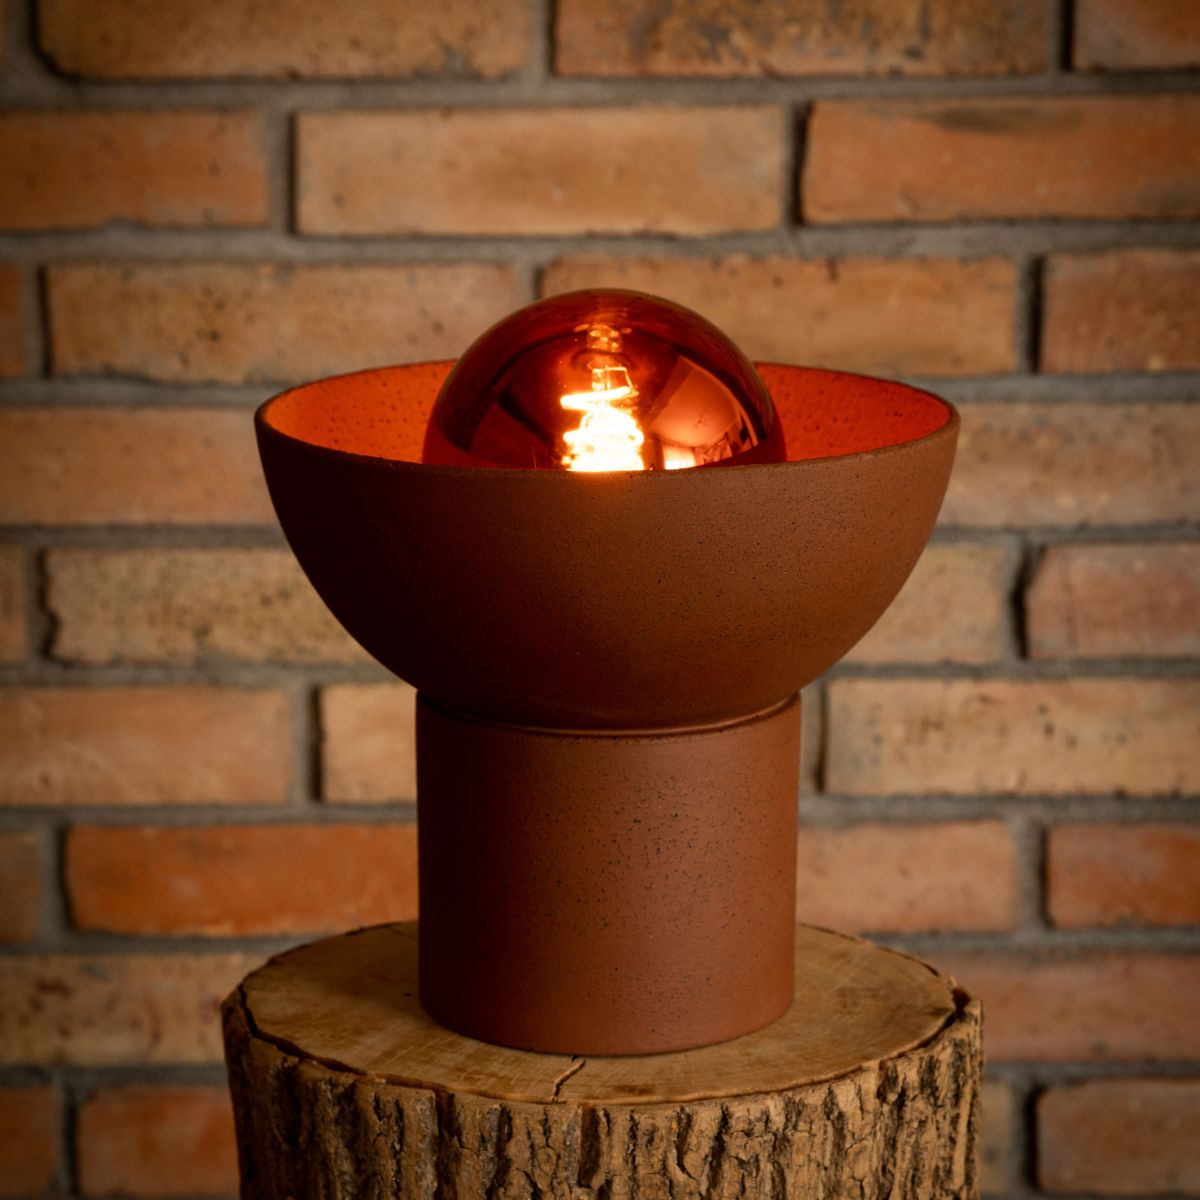 Handmade clay table lamp with red led bulb SAT A